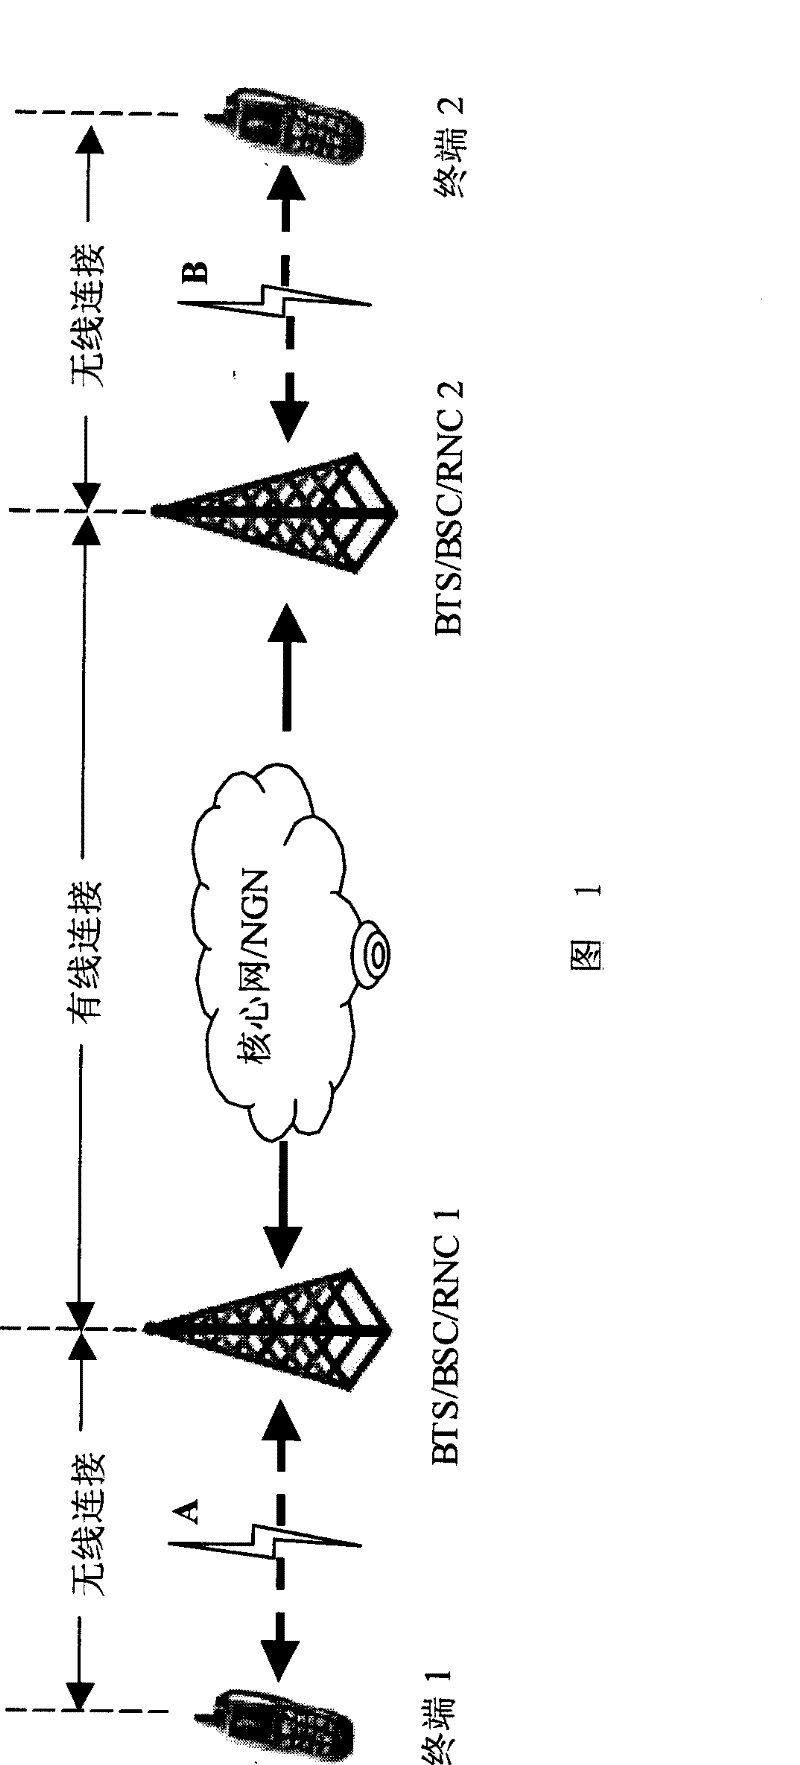 Video code stream error detecting and processing method in video communication